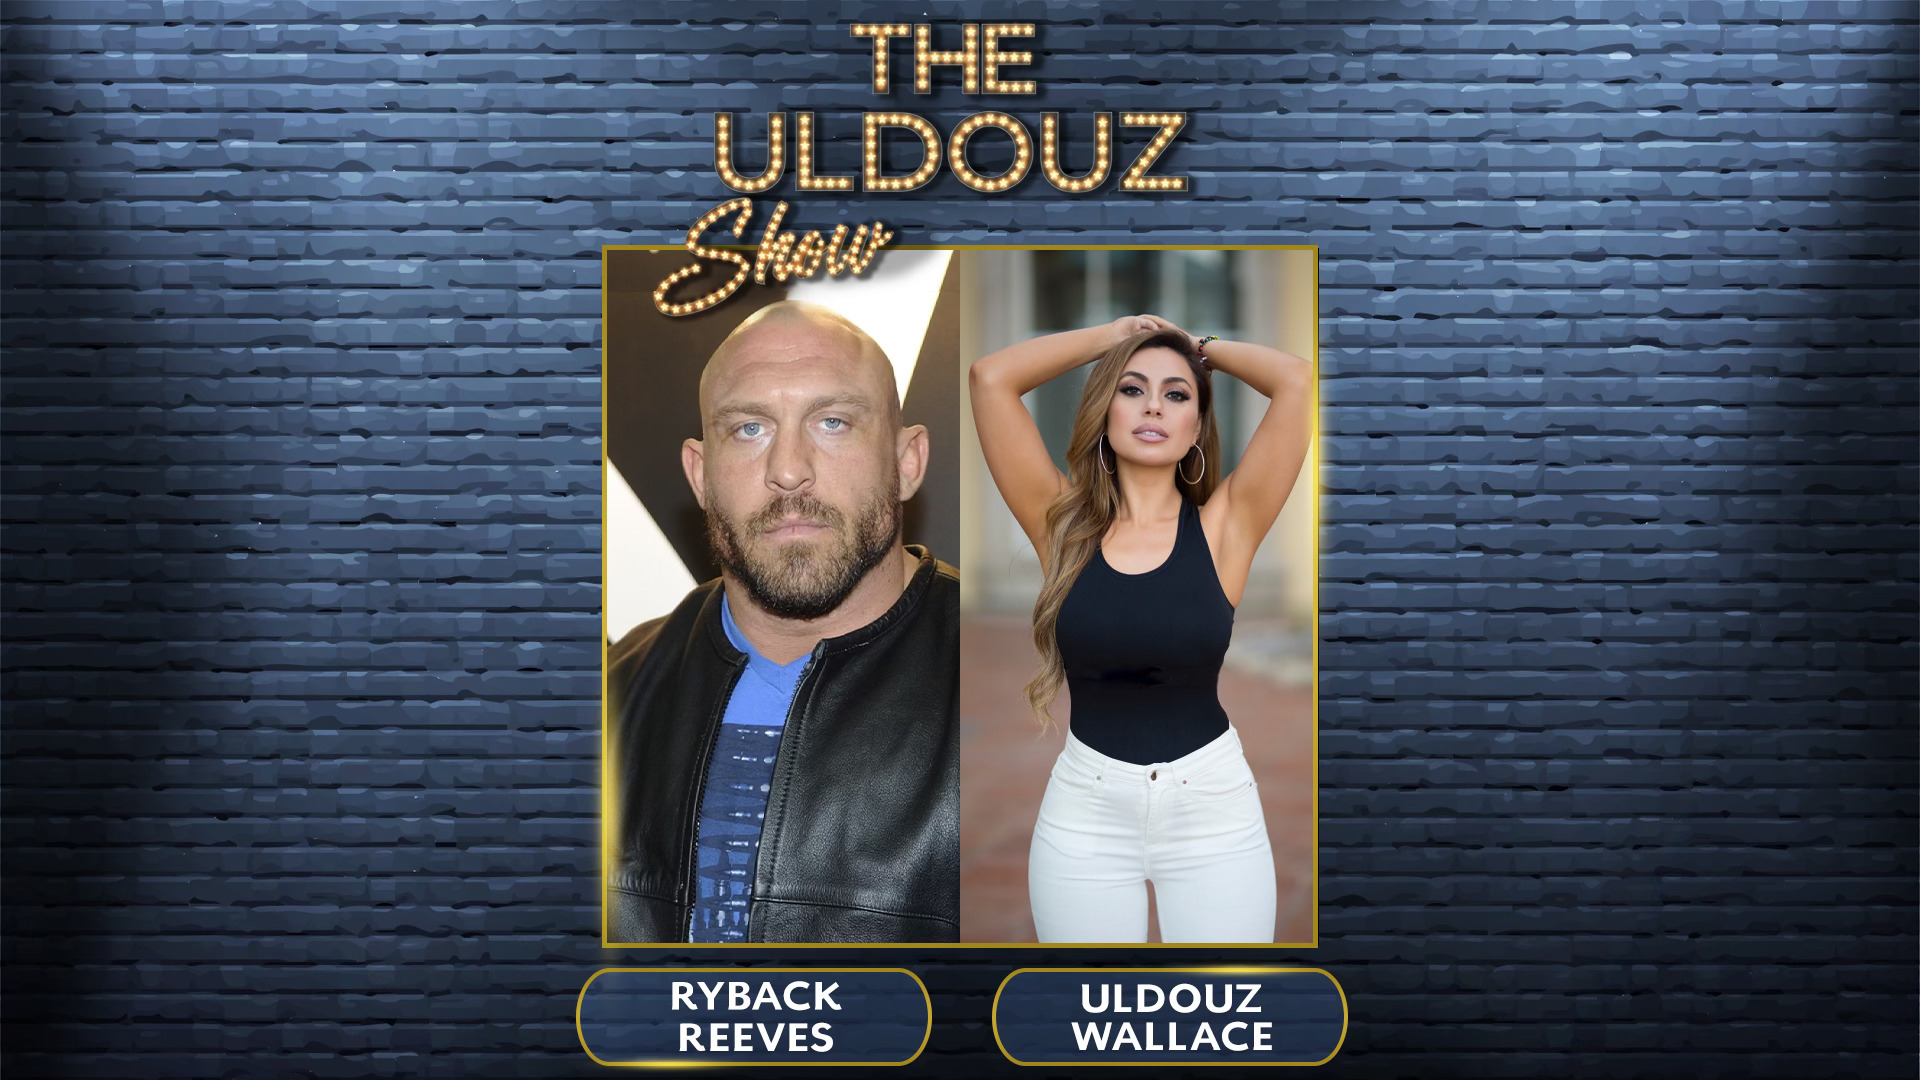 The Uldouz Show with Guest Ryback Reeves, Wrestler, Entrepreneur & Author